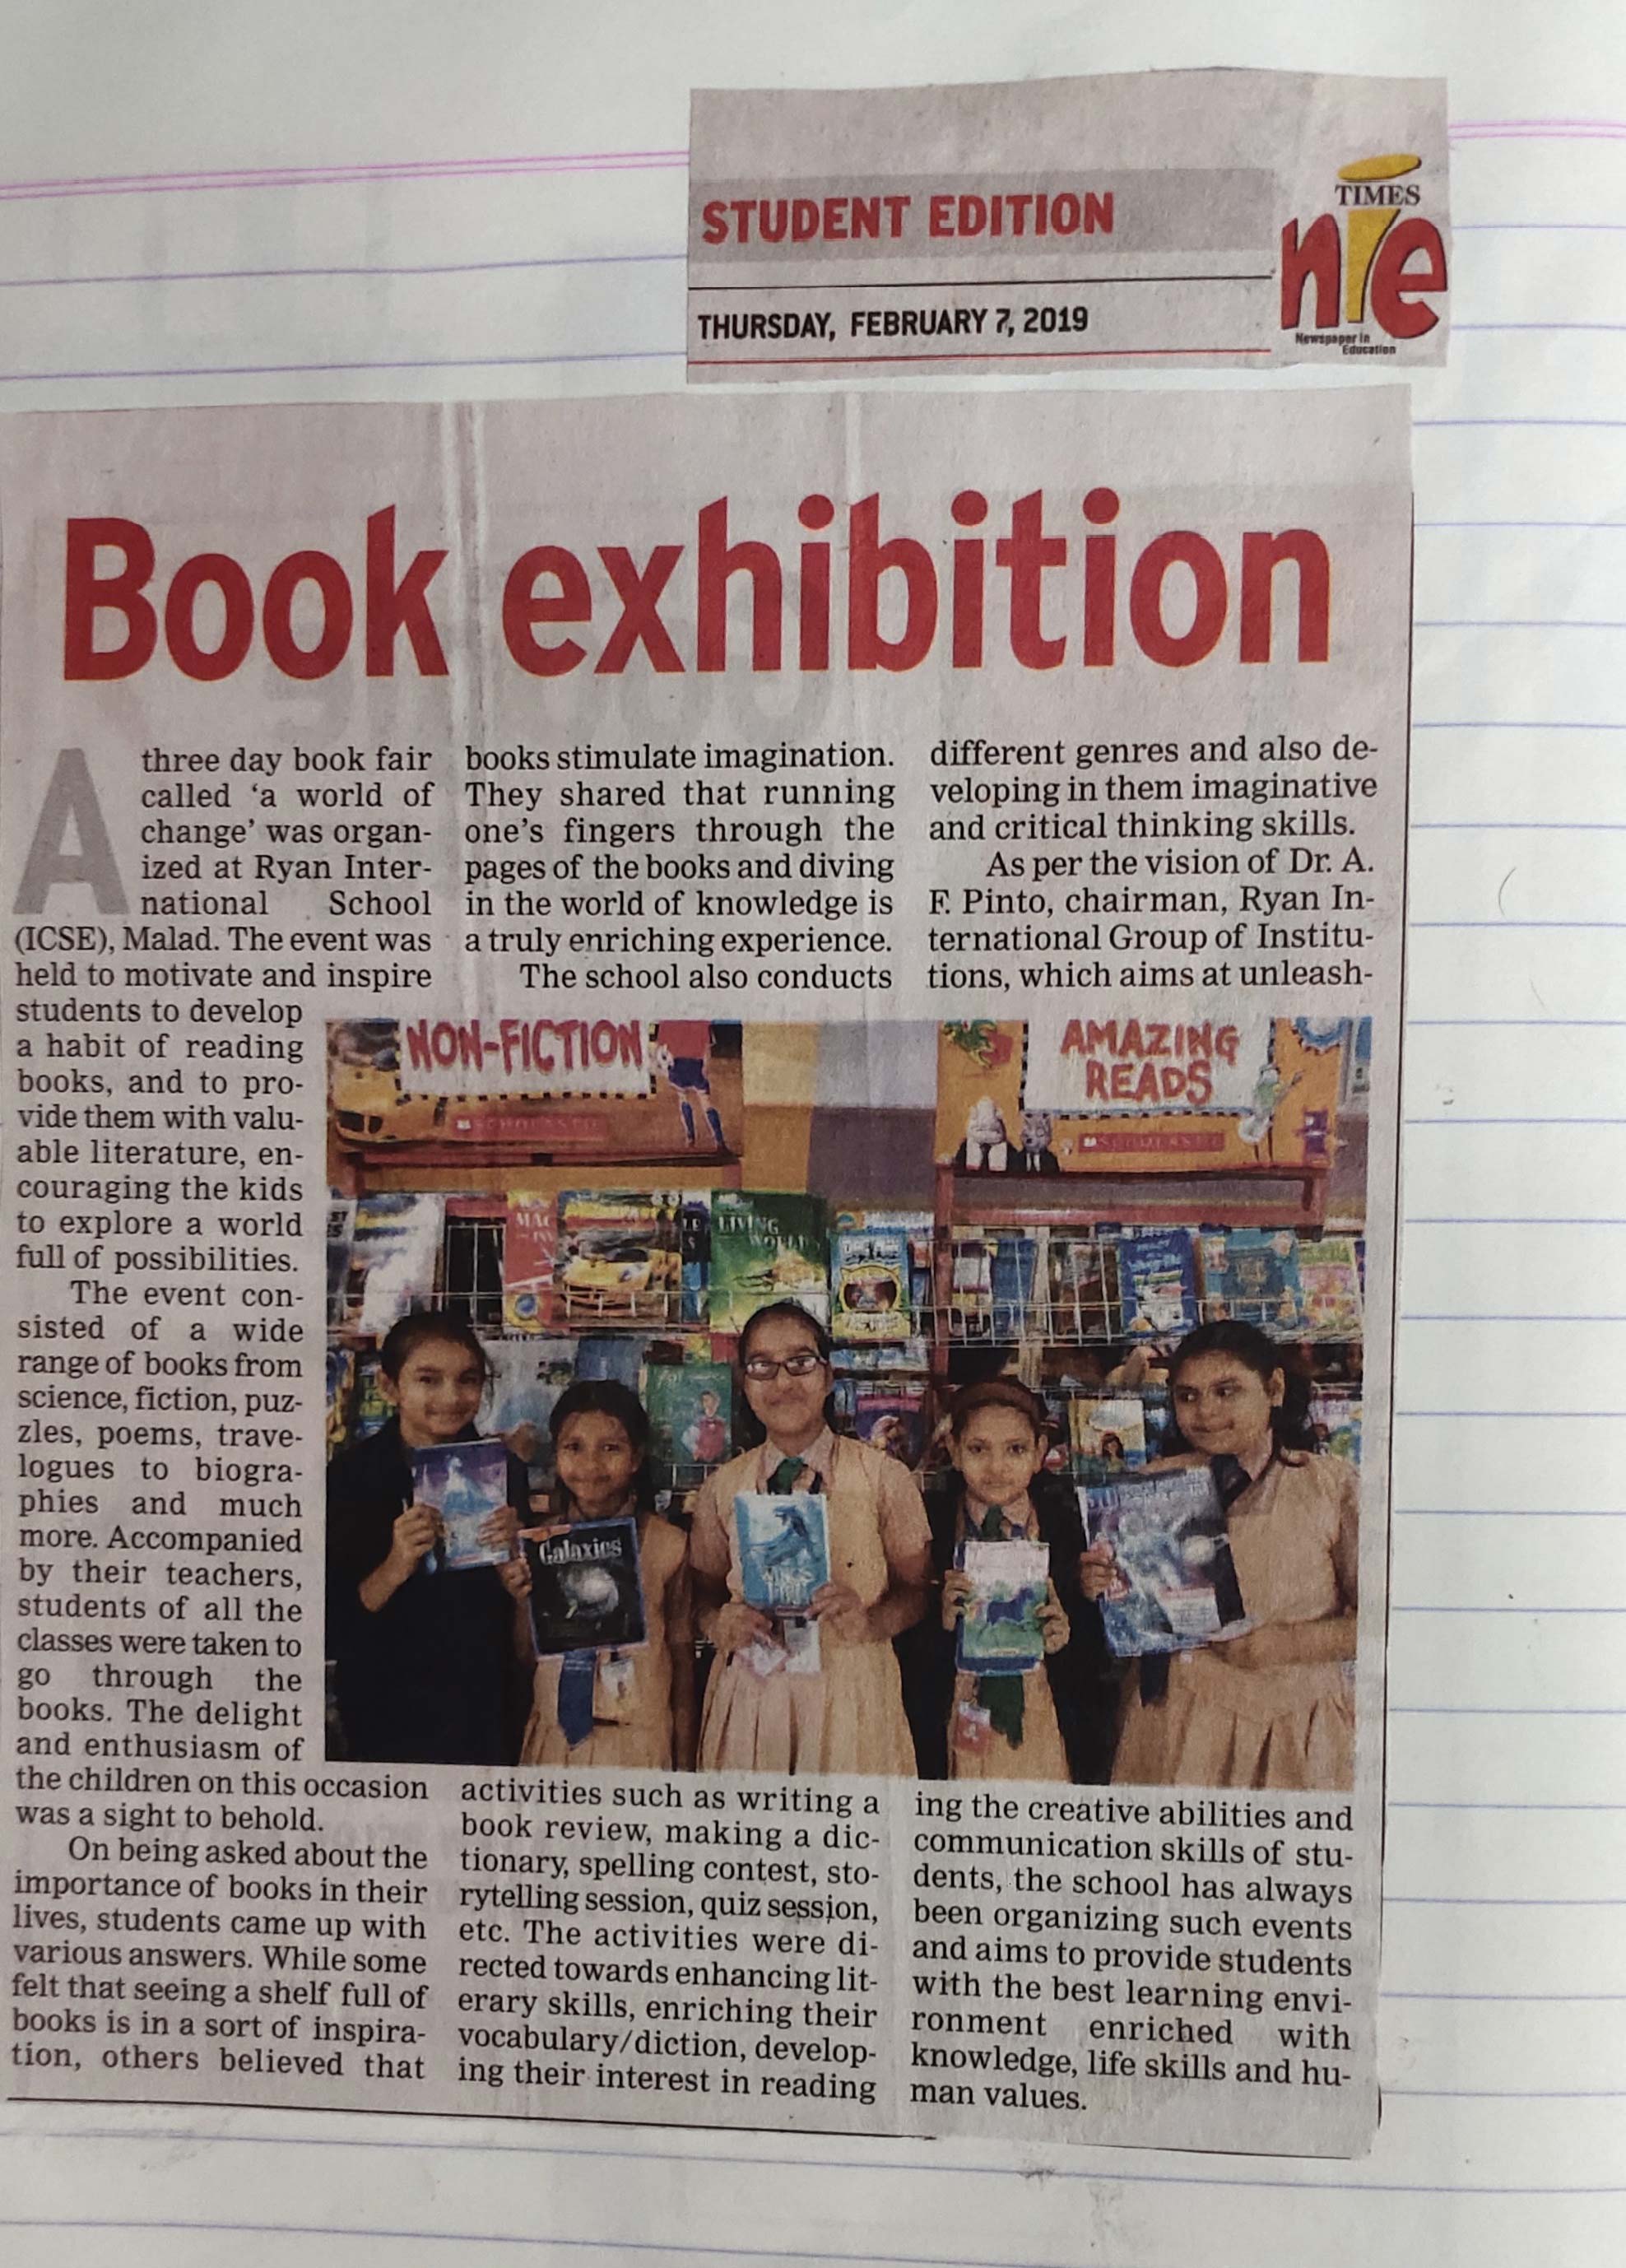 An article under the name “Book Exhibition” was published in the Times of India